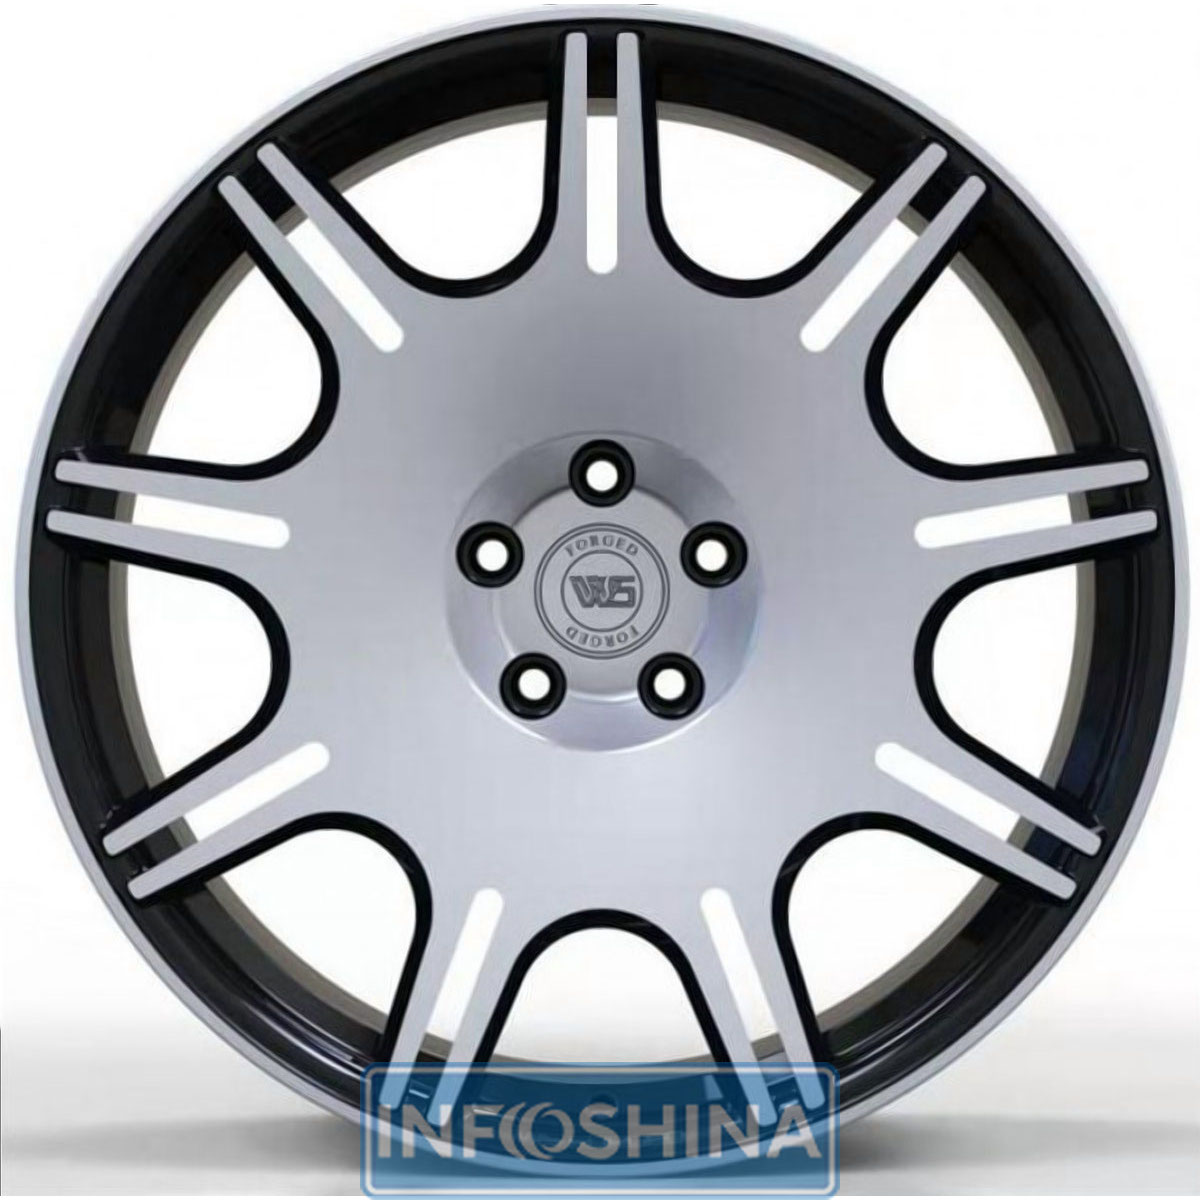 Купити диски WS Forged WS1249 Gloss Black With Machined Face R21 W9 PCD5x112 ET36 DIA66.6